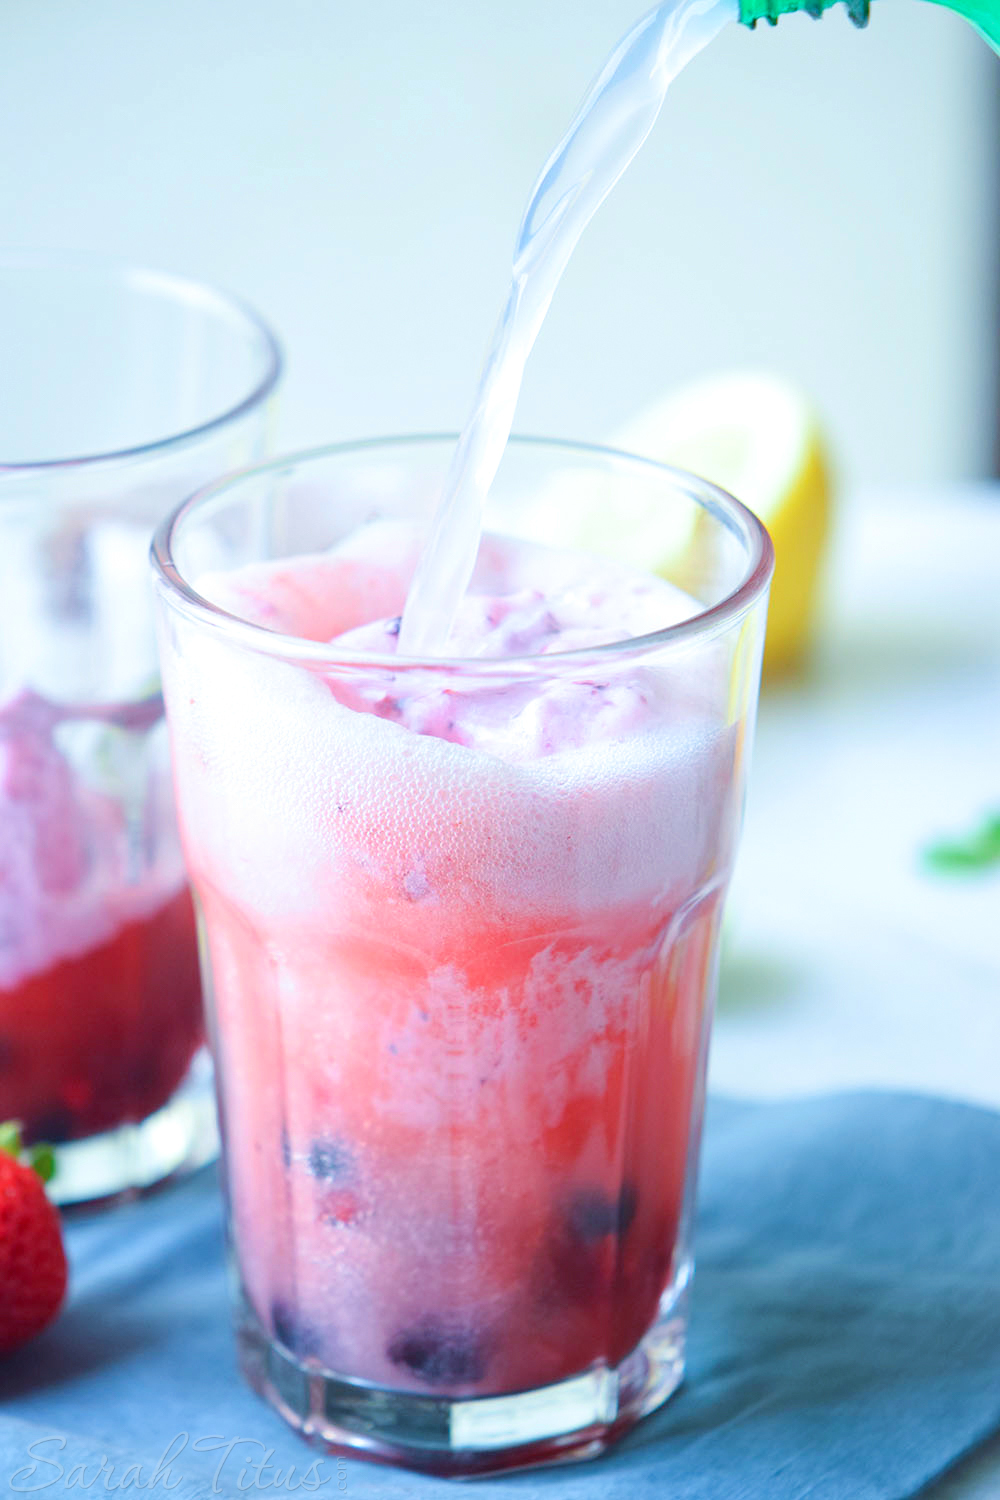 Pouring lemon lime soda over berries, strawberry juice and ice cream in glasses